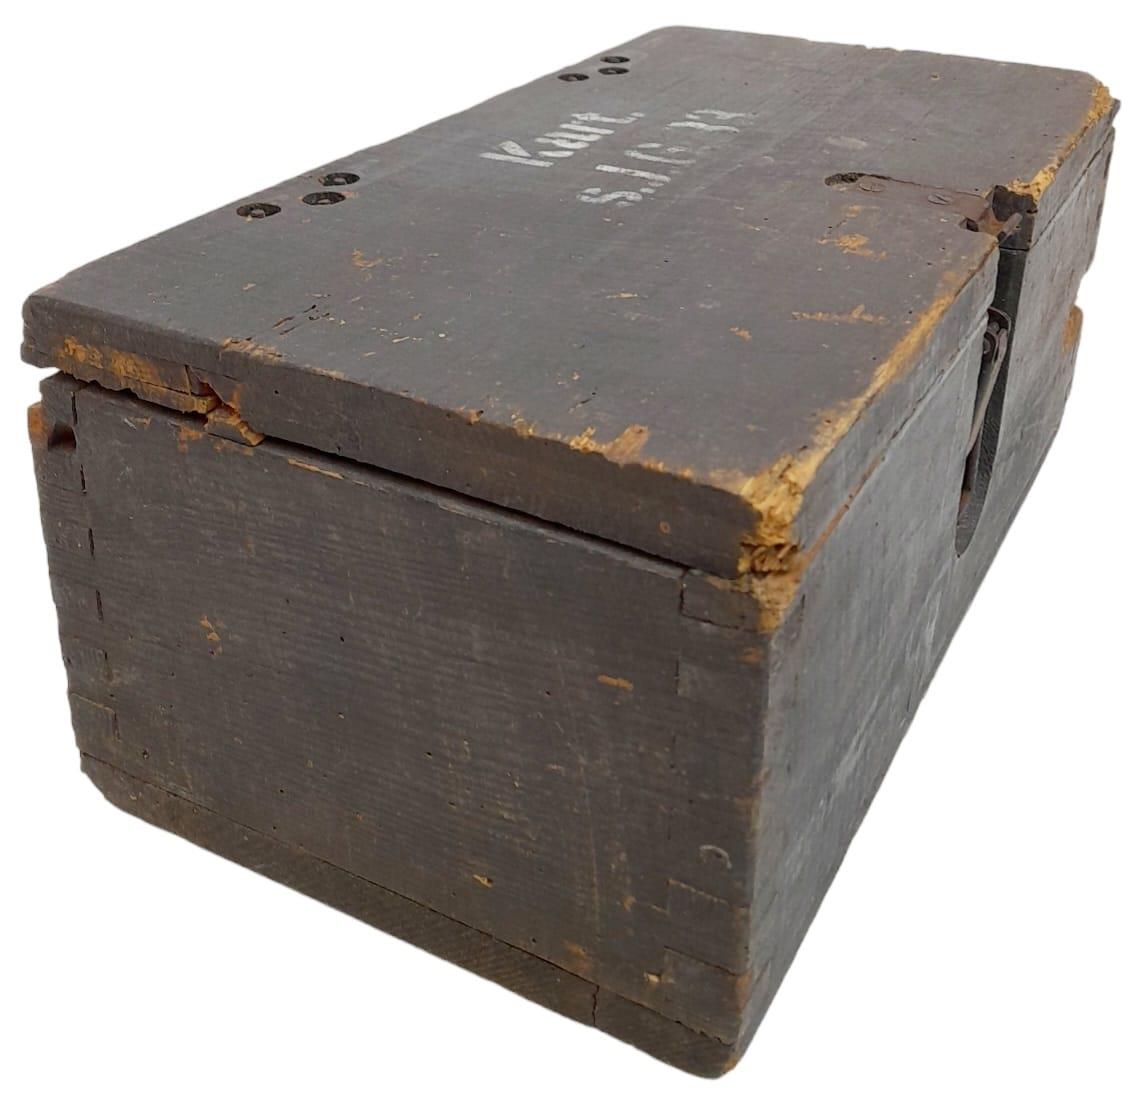 WW2 German 15cm Sig 33 Cartridge Box with original labels, stencils, and internals. - Image 9 of 15